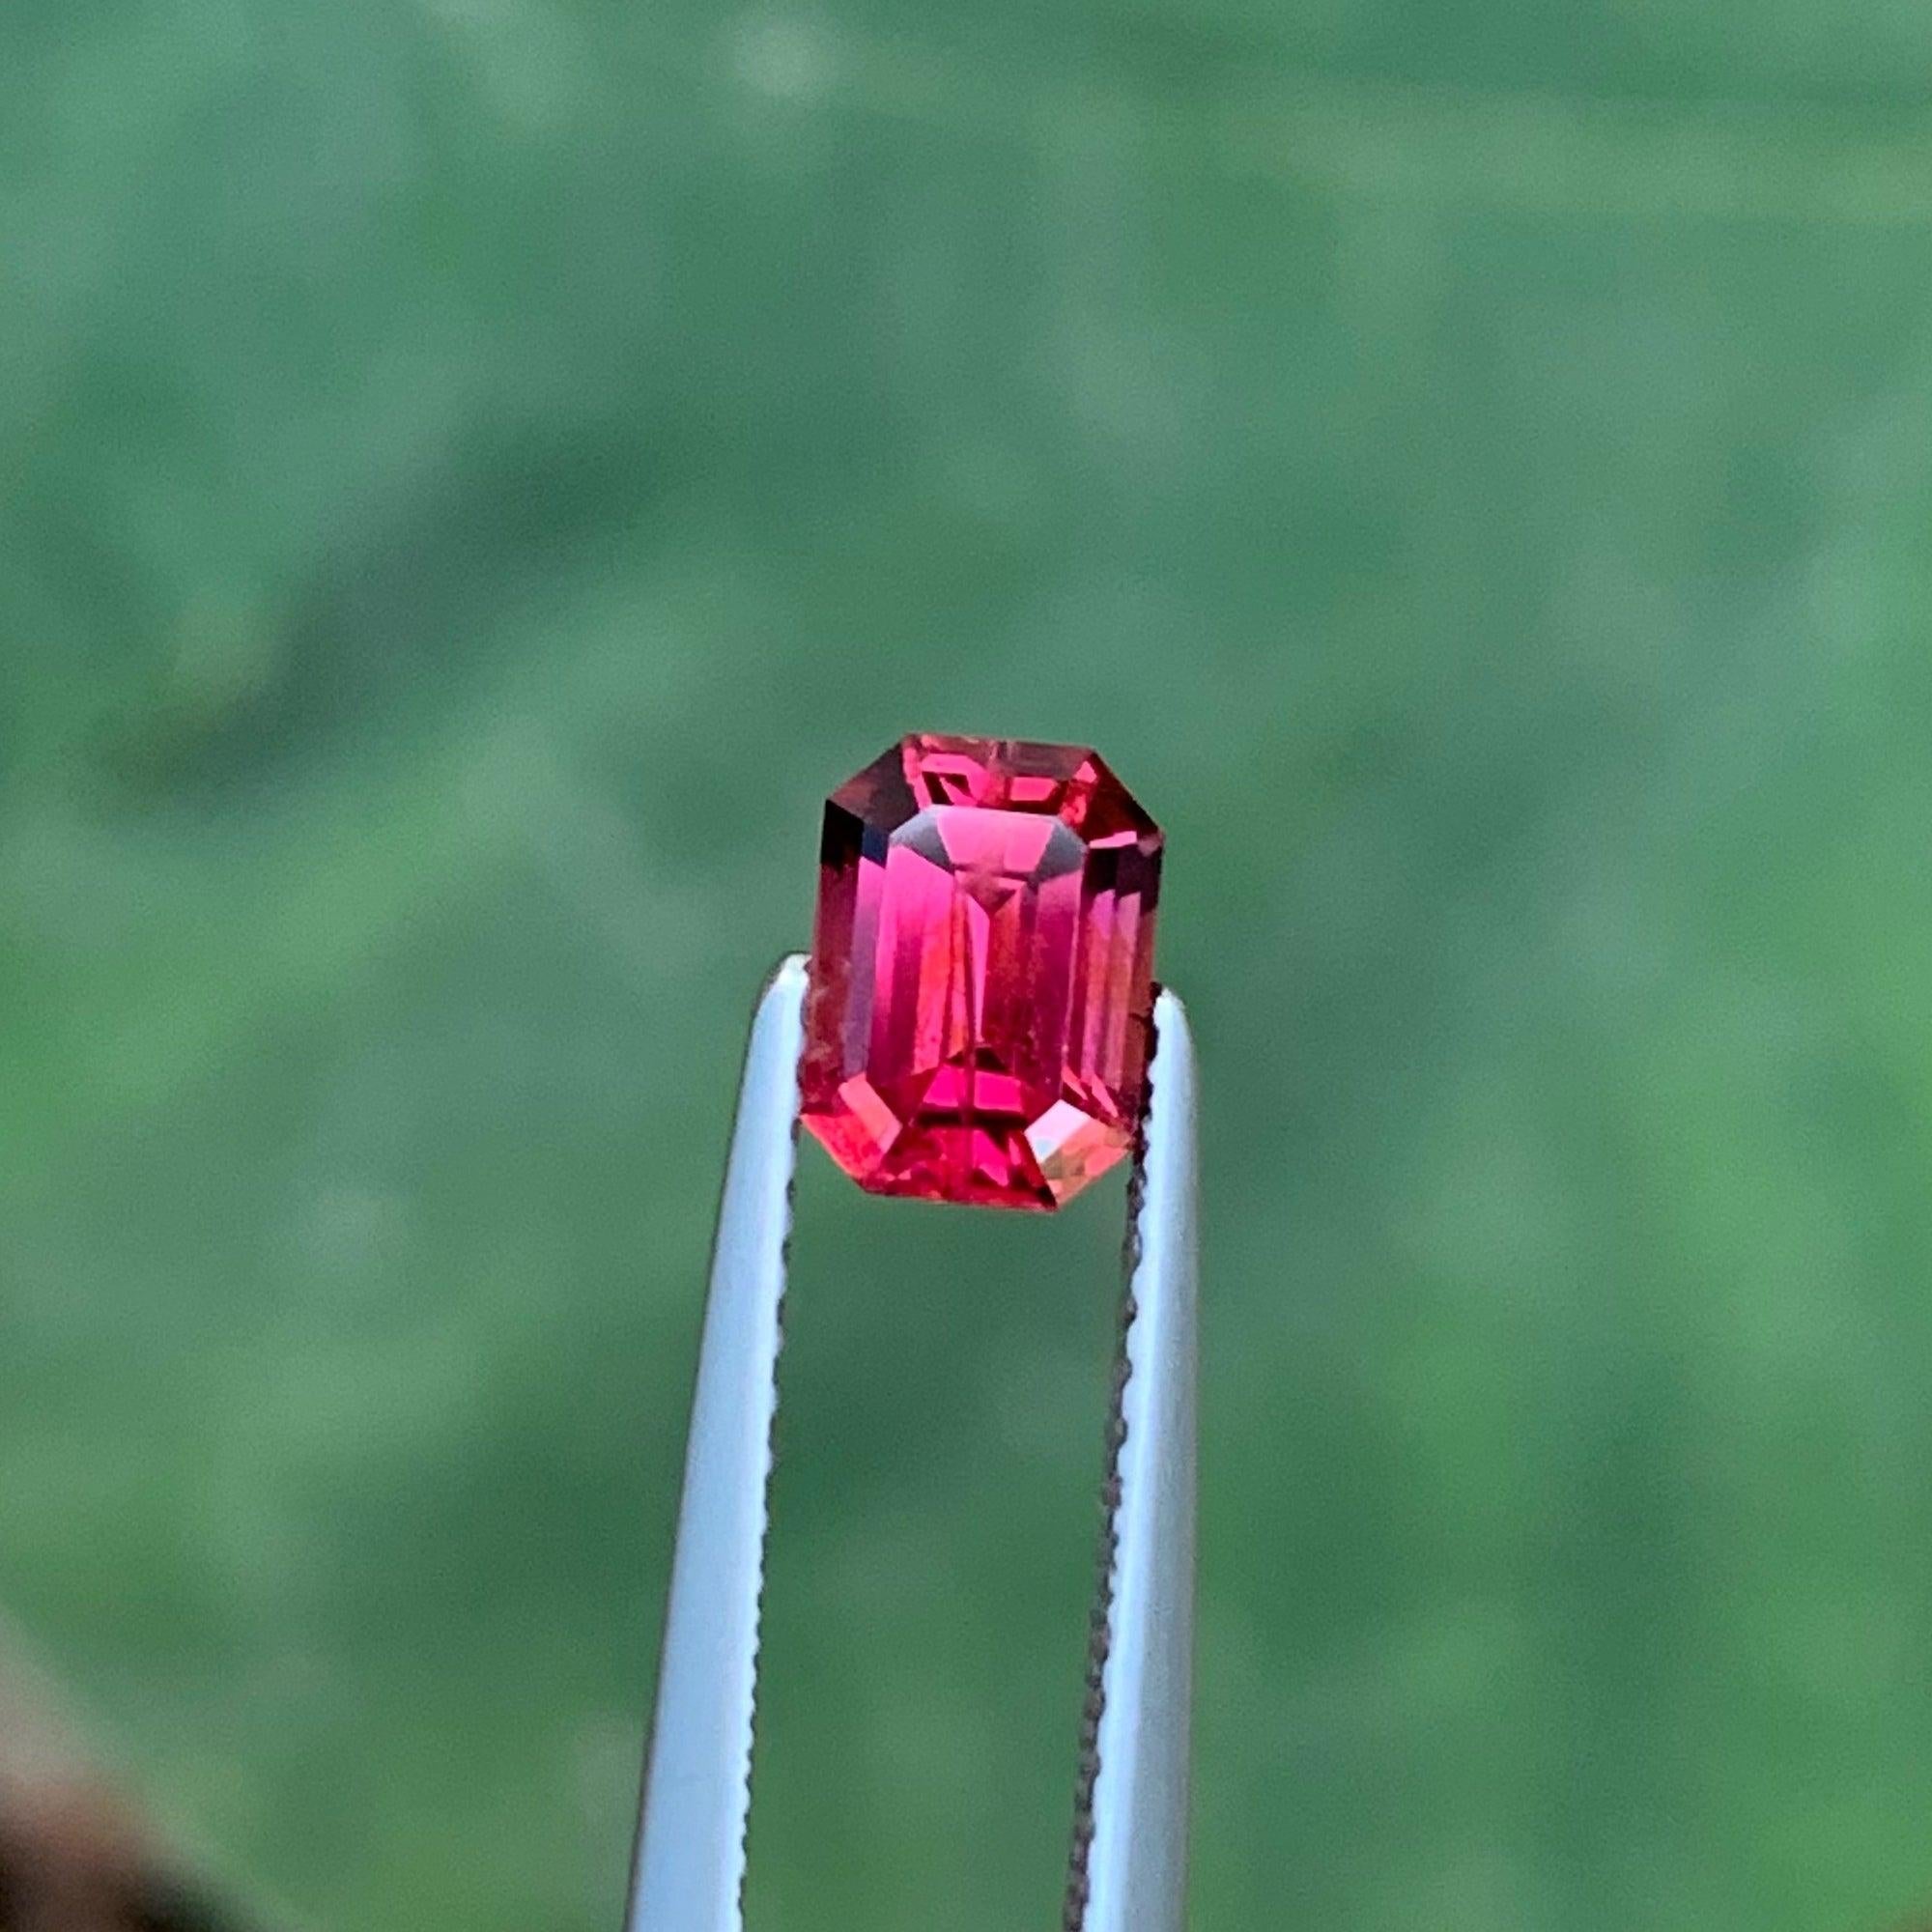 Nicely Pinkish Red Loose Garnet Stone, Available for sale at whole sale price natural high quality 1.05 carats Vss Clarity Natural Loose Garnet from Malawi.

Product Information:
GEMSTONE NAME: Nicely Pinkish Red Loose Garnet Stone
WEIGHT:	1.05